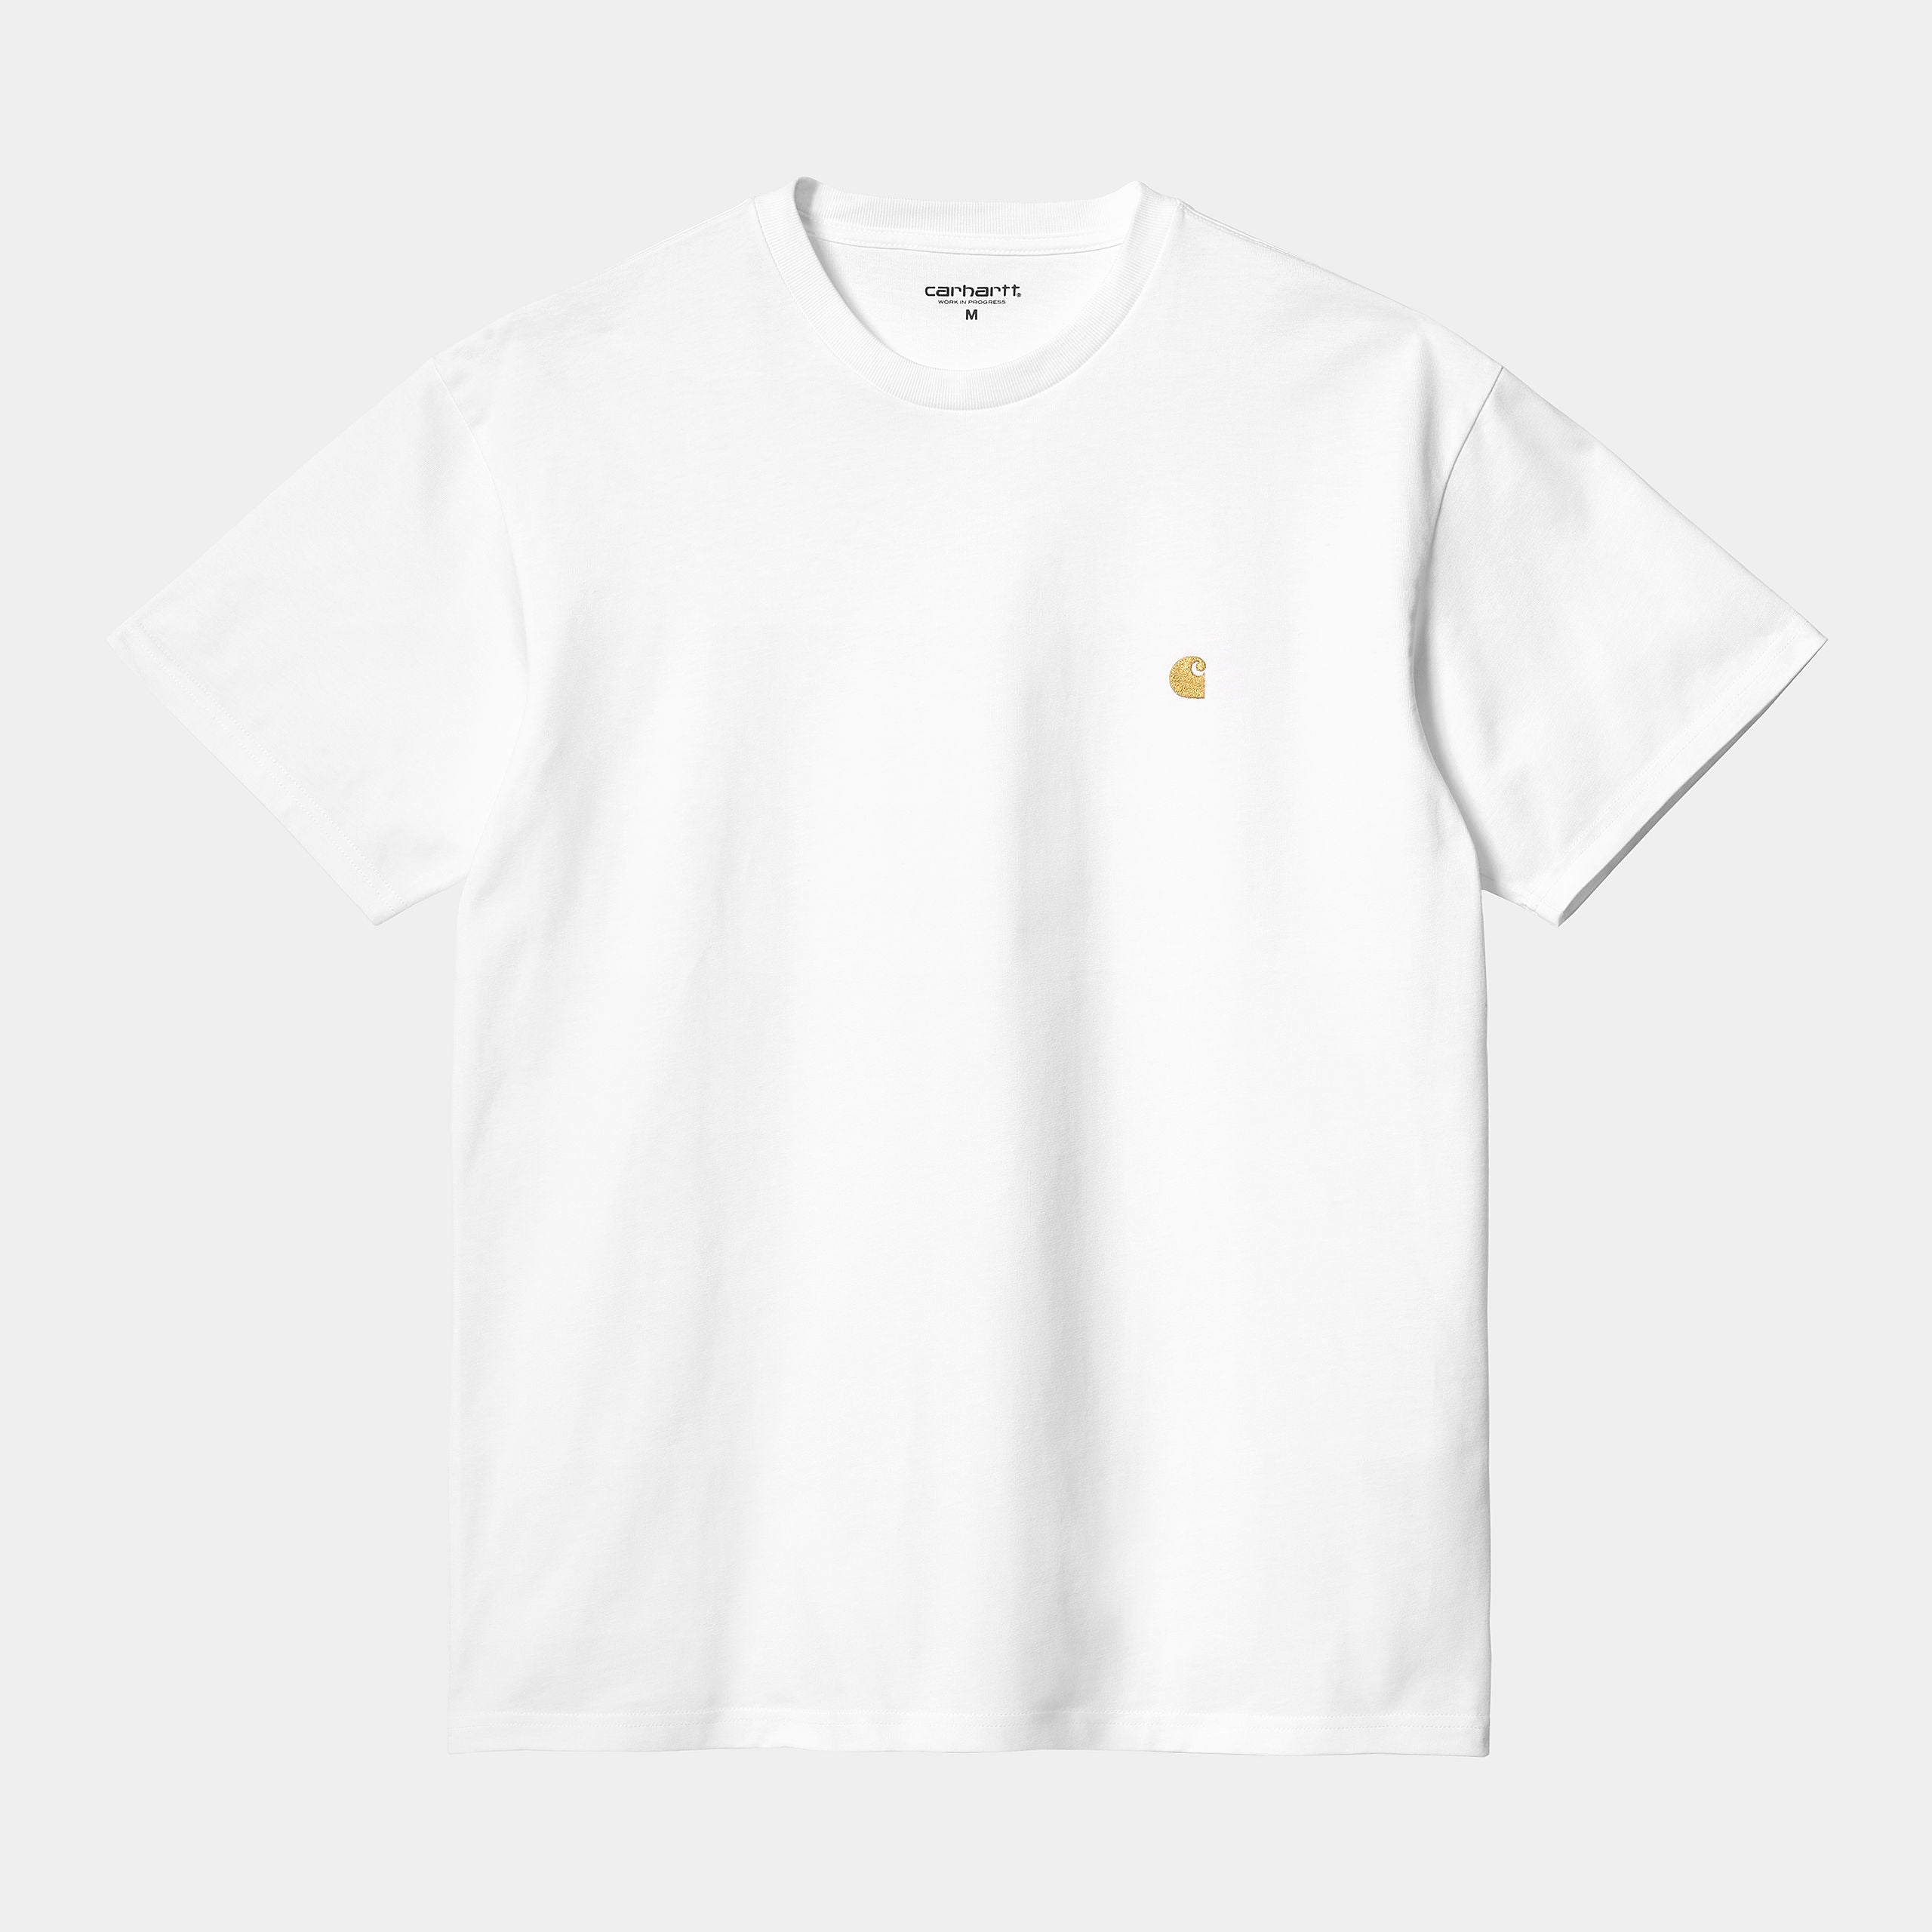 Carhartt WIP S/S Chase T-Shirt, White/Gold